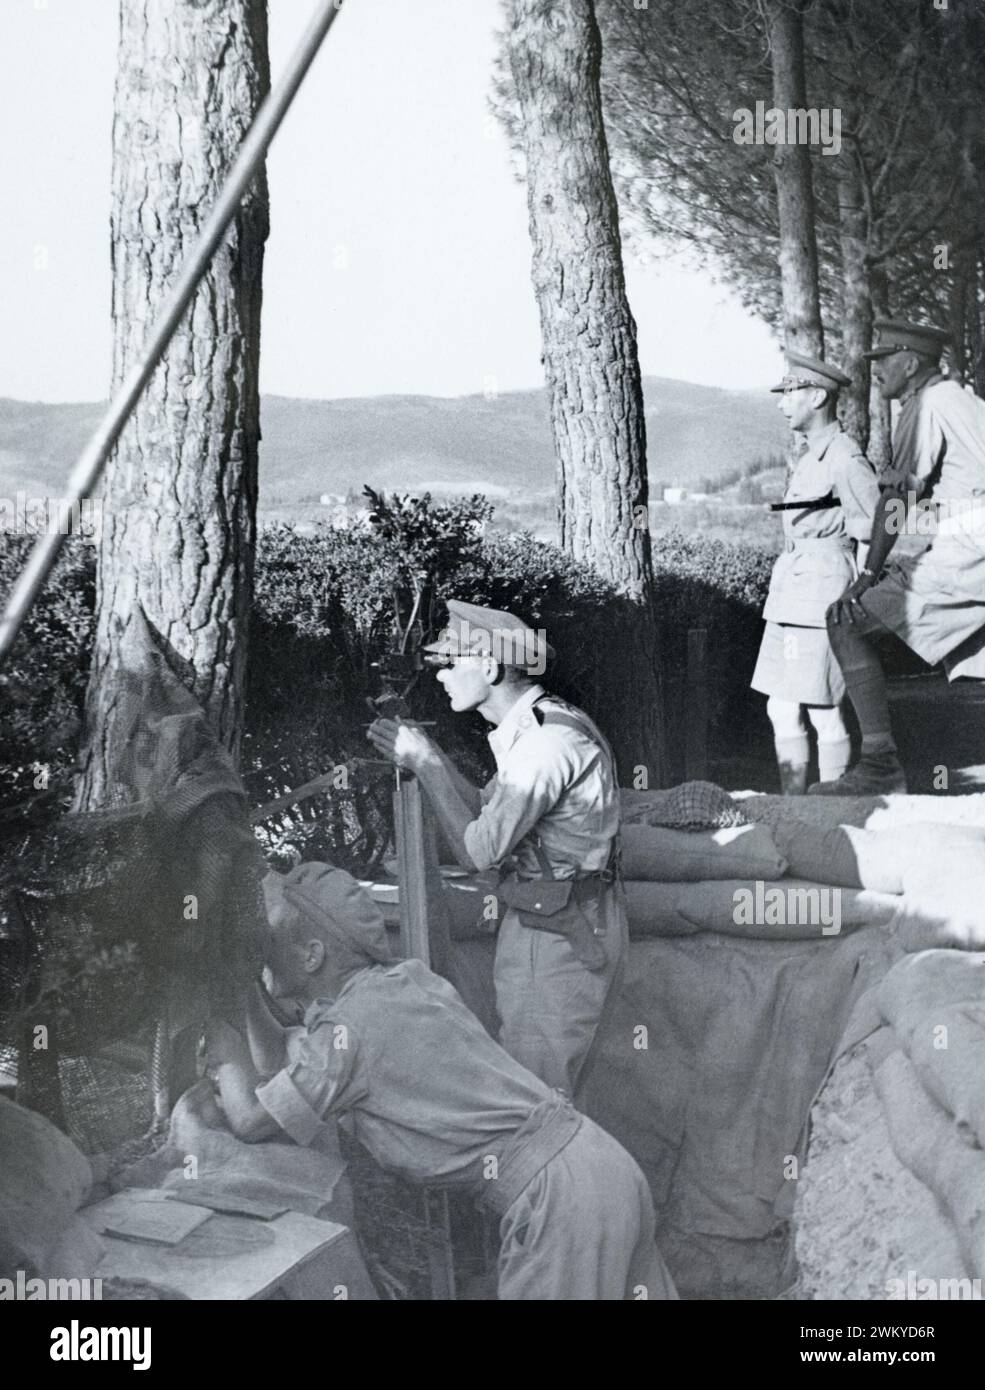 King George VI (second from the right) with General Sir Oliver Leese (far right) watching an infantry attack from an artillery observation post near Campriano, Italy, c. July 1944. Stock Photo